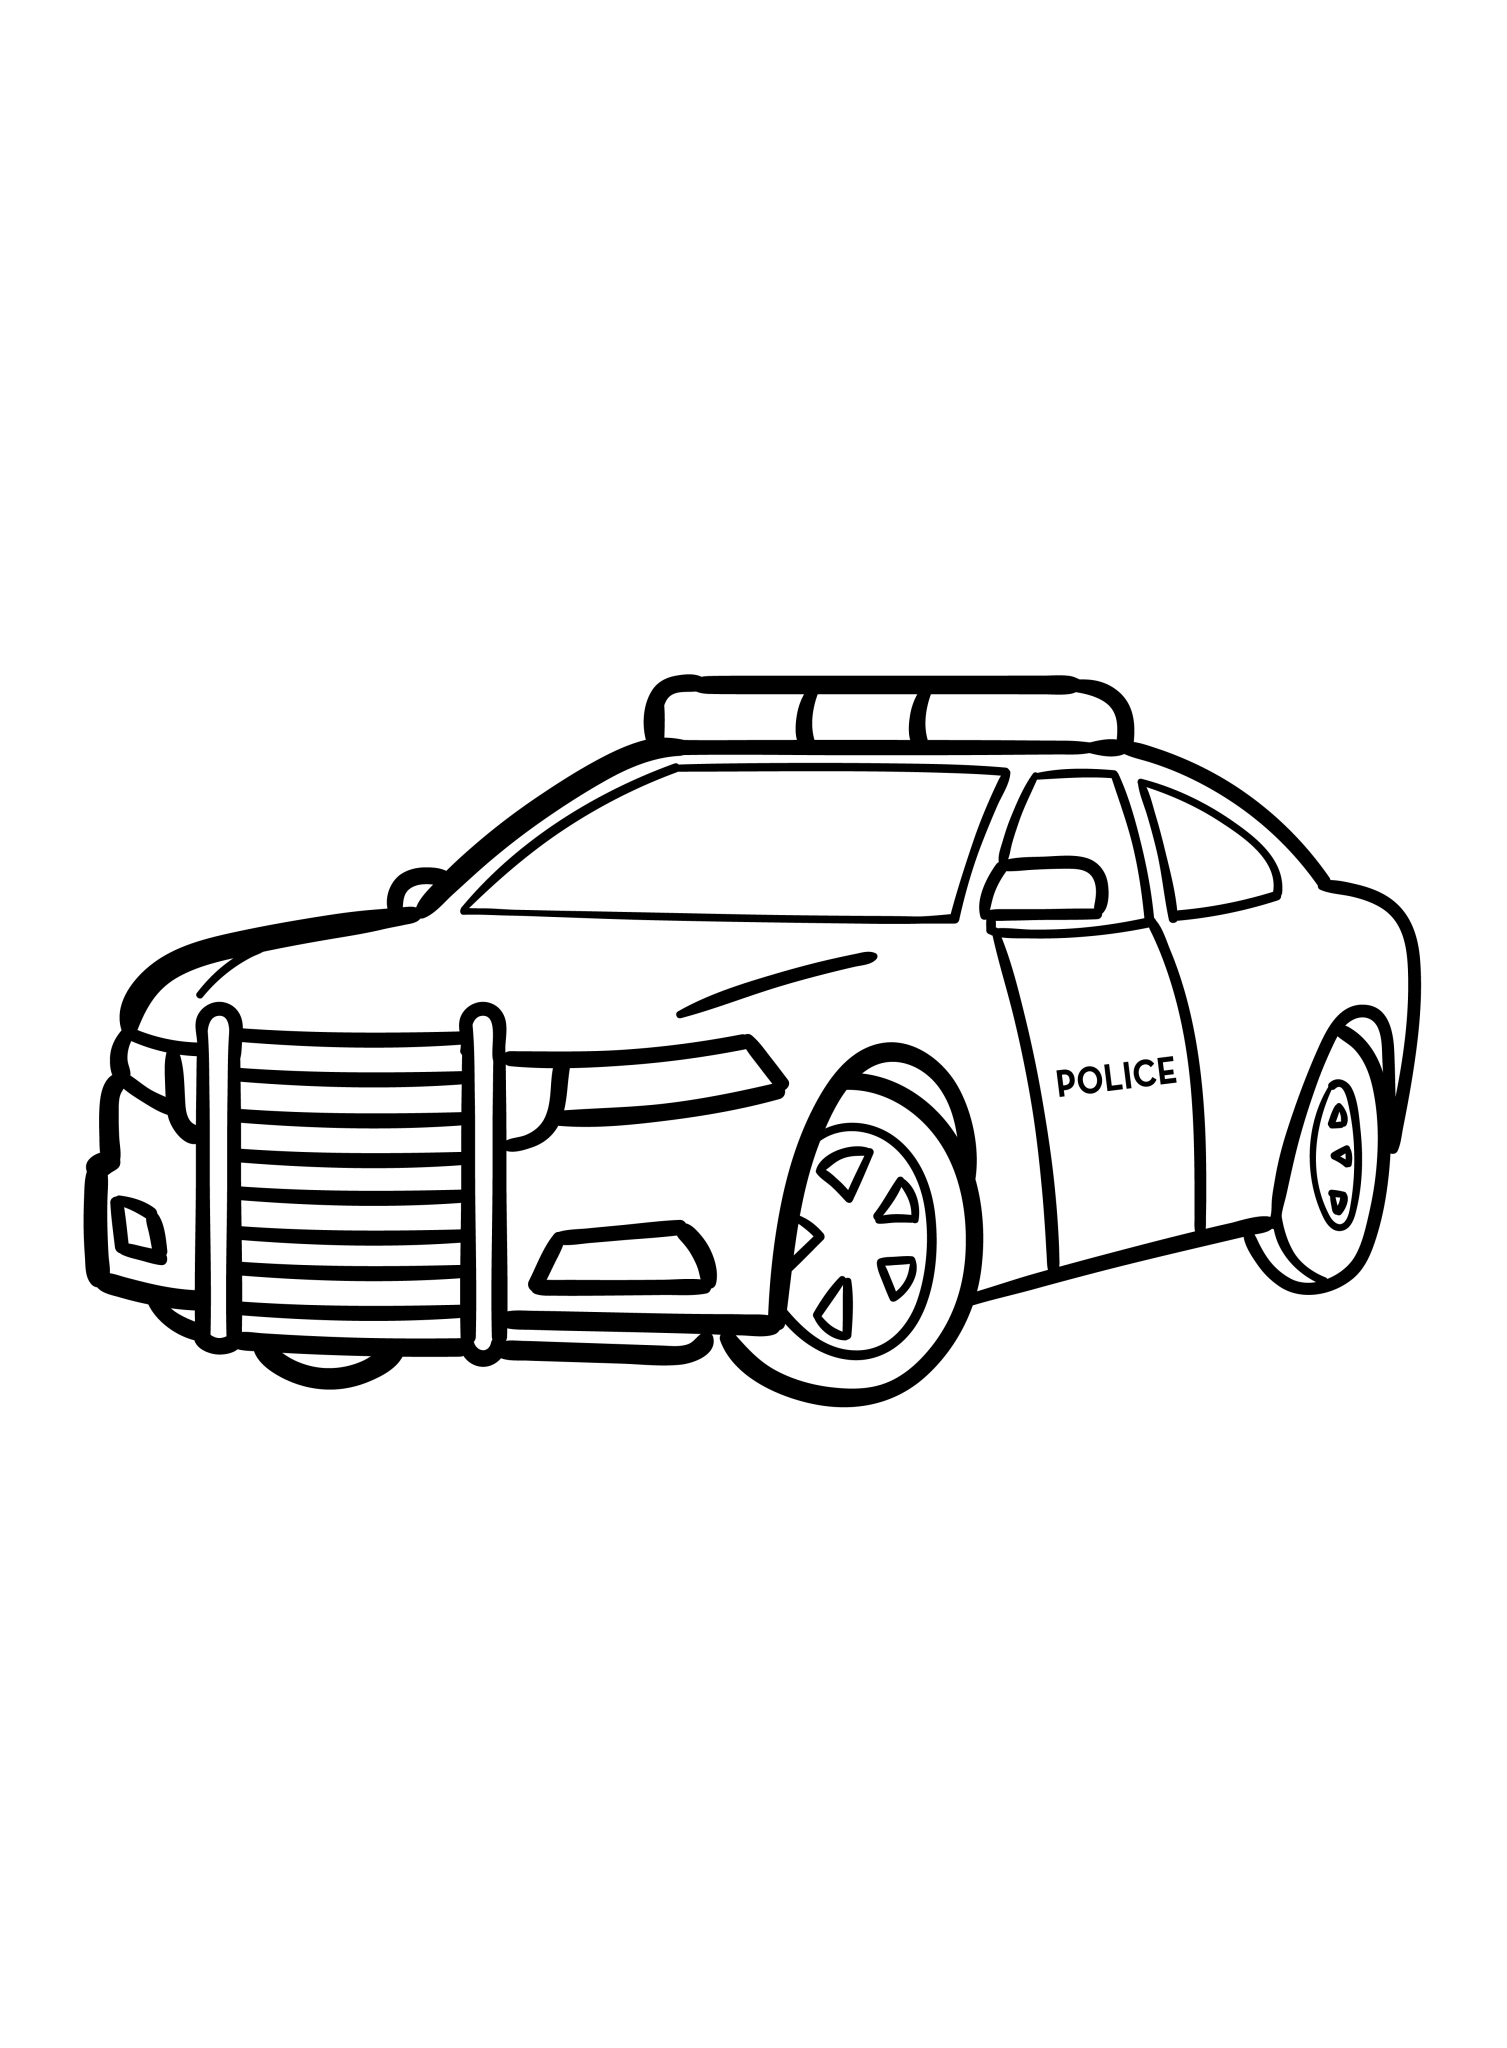 Get Your Kids Excited with Police Car Coloring Pages | GBcoloring